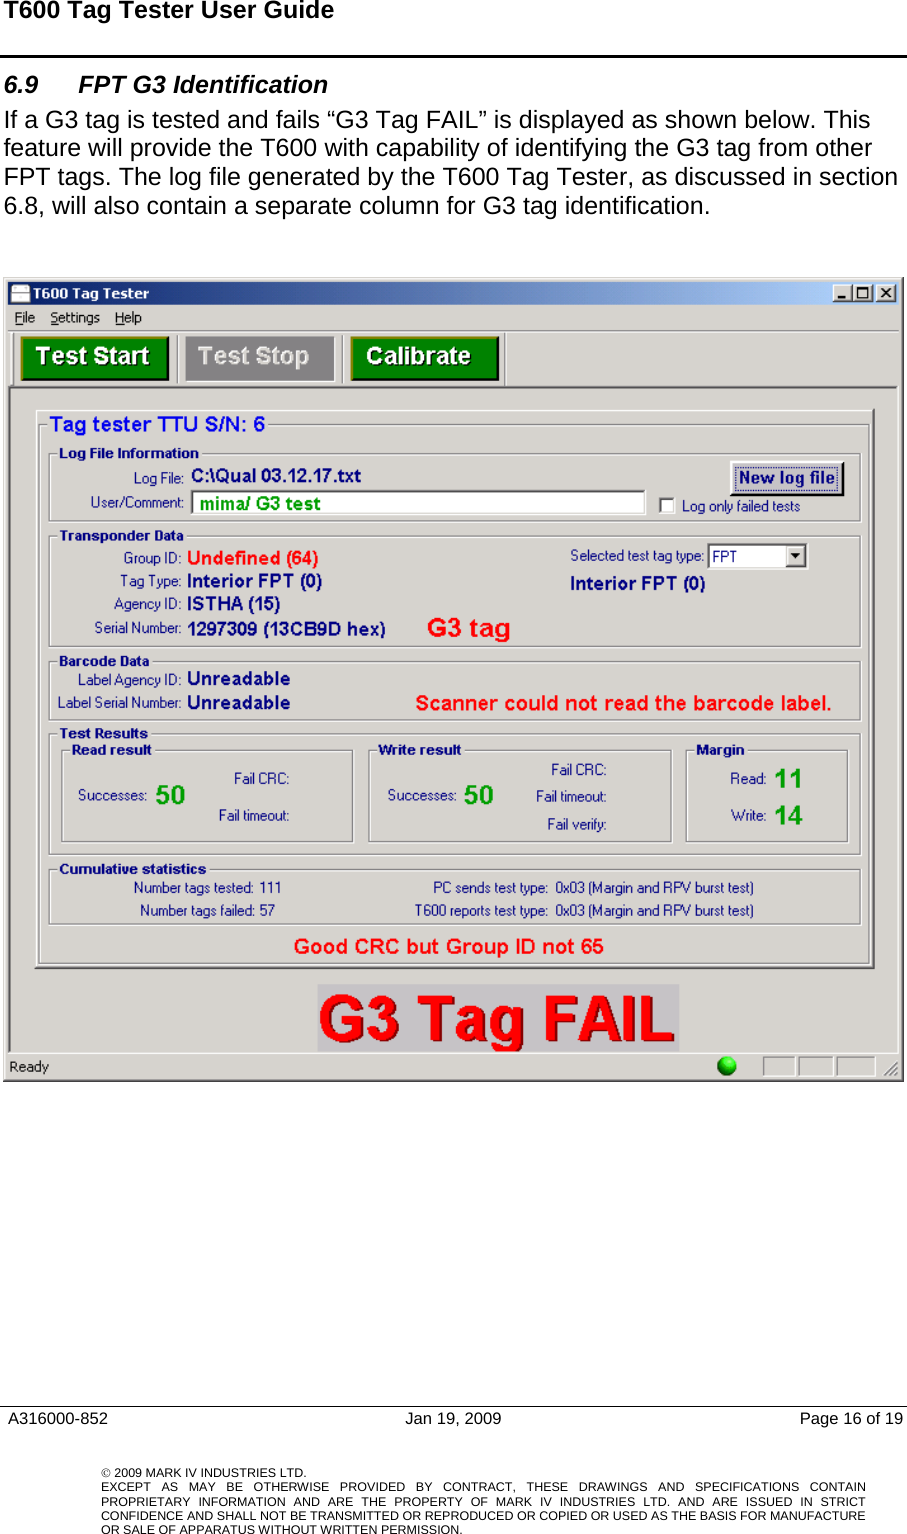 T600 Tag Tester User Guide   6.9  FPT G3 Identification  If a G3 tag is tested and fails “G3 Tag FAIL” is displayed as shown below. This feature will provide the T600 with capability of identifying the G3 tag from other FPT tags. The log file generated by the T600 Tag Tester, as discussed in section 6.8, will also contain a separate column for G3 tag identification.      A316000-852  Jan 19, 2009  Page 16 of 19    © 2009 MARK IV INDUSTRIES LTD. EXCEPT AS MAY BE OTHERWISE PROVIDED BY CONTRACT, THESE DRAWINGS AND SPECIFICATIONS CONTAINPROPRIETARY INFORMATION AND ARE THE PROPERTY OF MARK IV INDUSTRIES LTD. AND ARE ISSUED IN STRICT CONFIDENCE AND SHALL NOT BE TRANSMITTED OR REPRODUCED OR COPIED OR USED AS THE BASIS FOR MANUFACTUREOR SALE OF APPARATUS WITHOUT WRITTEN PERMISSION.